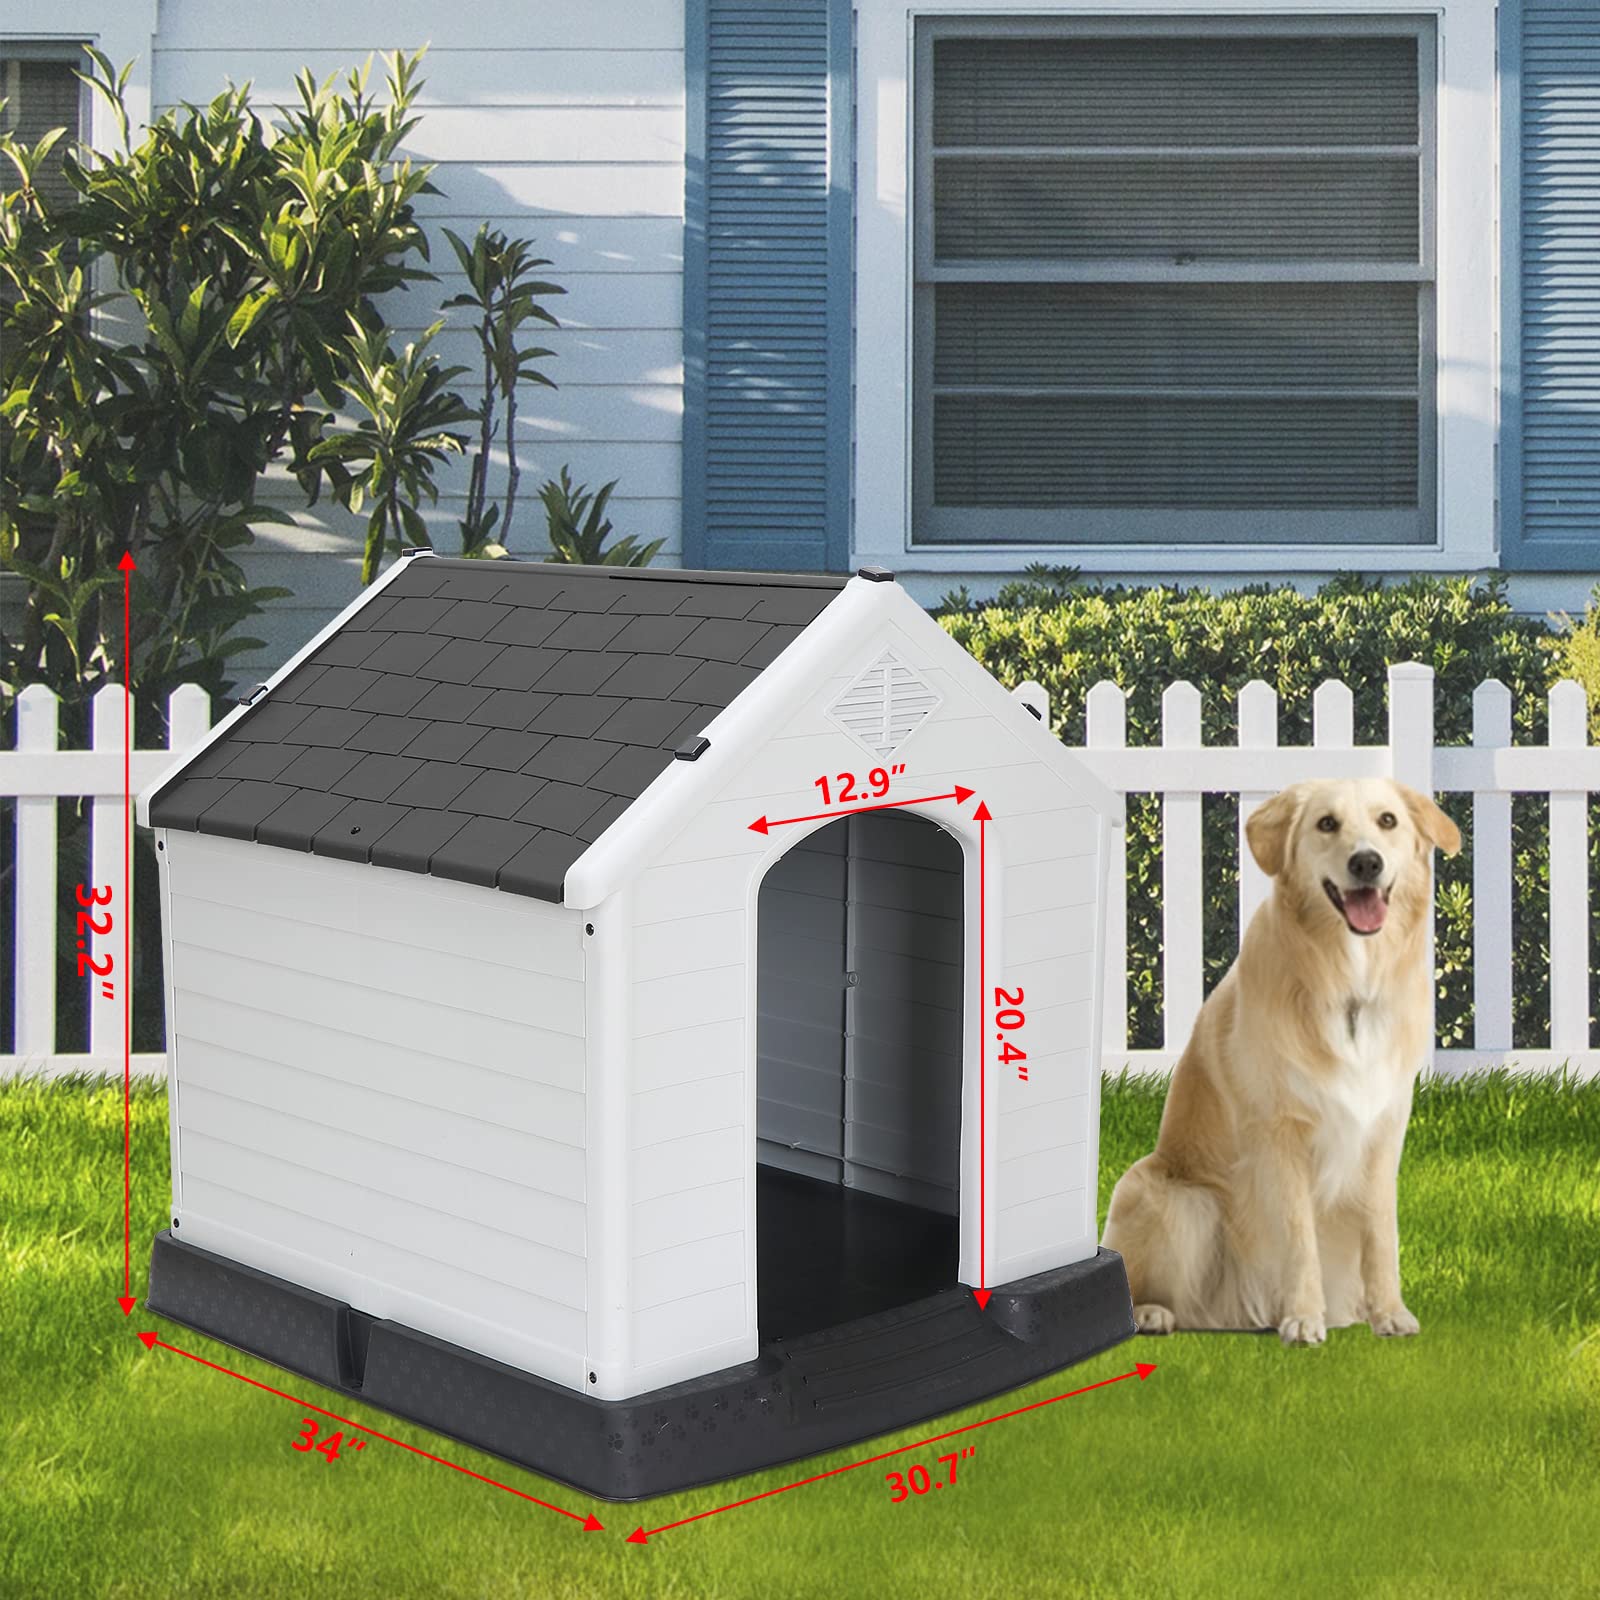 Pet Republic Large Plastic Dog House Indoor Outdoor Doghouse Dog Kennel Easy to Assemble Puppy Shelter w/Air Vents Elevated Floor Waterproof